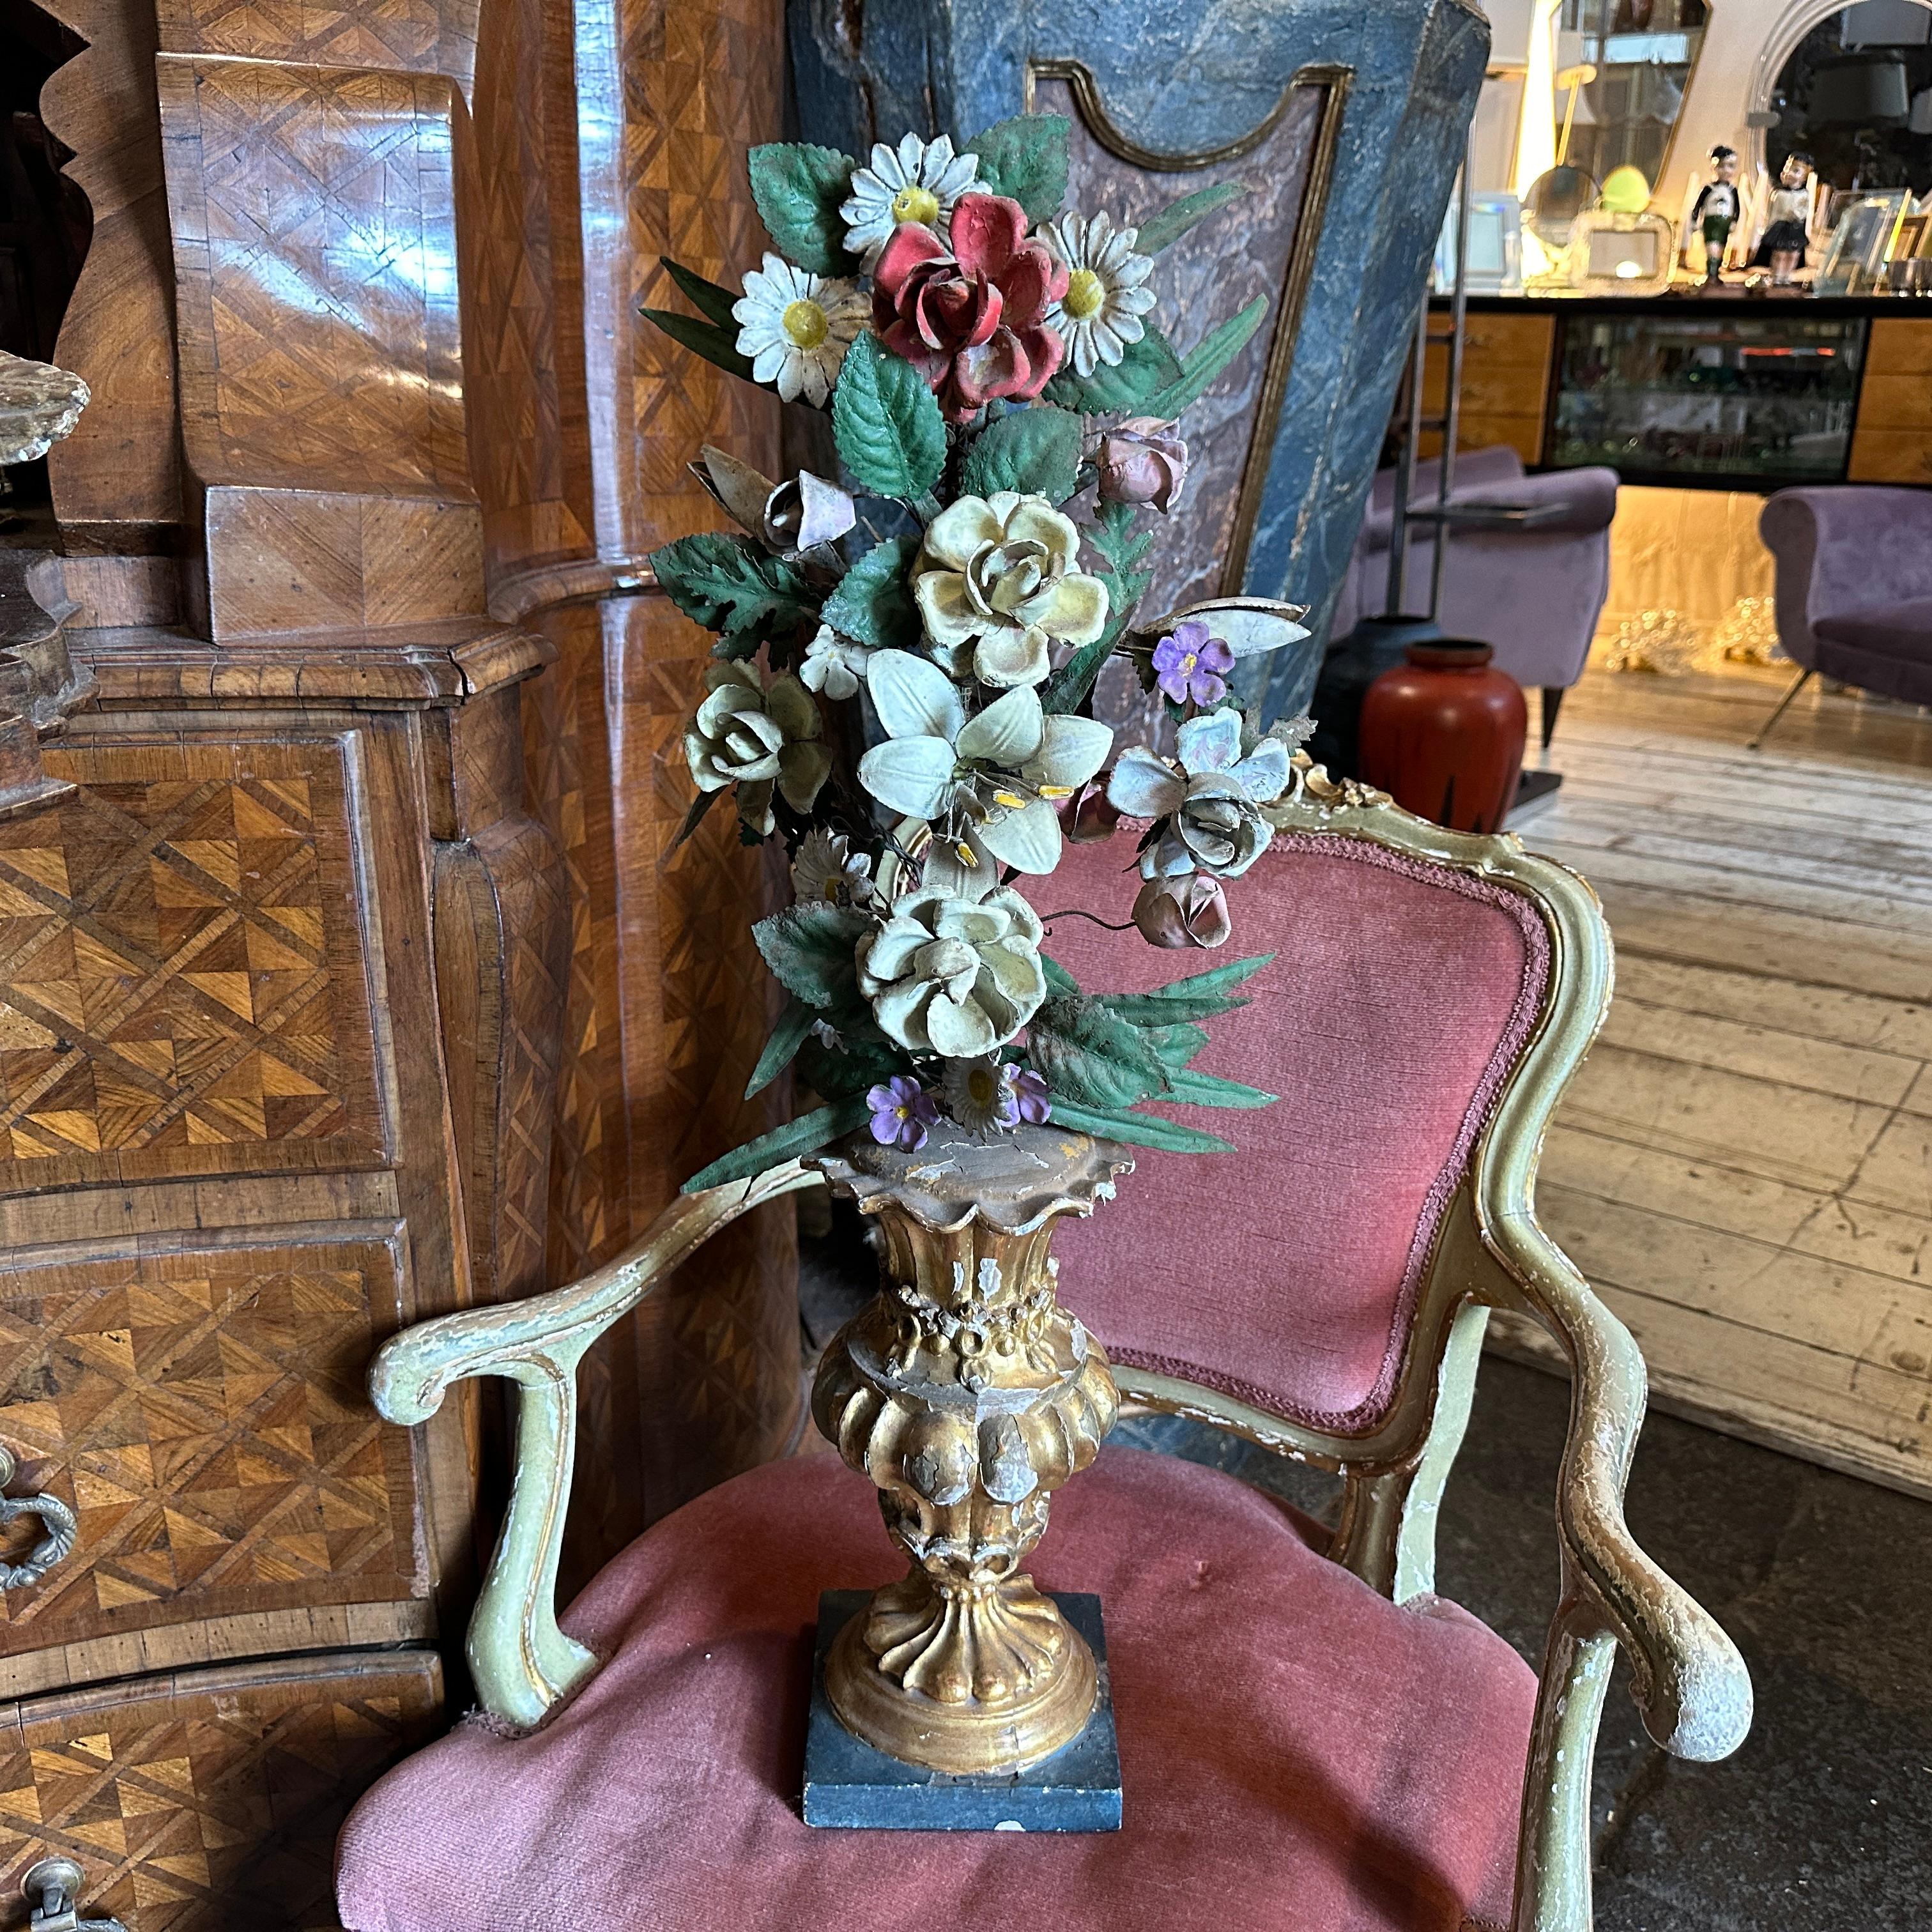 A Sicilian wooden palm holder with an original floral composition, handcrafted in Italy in the late 19th century, features lacquered and gilded wood. The palm holder is in its original condition with signs of use and age. It was used to adorn houses